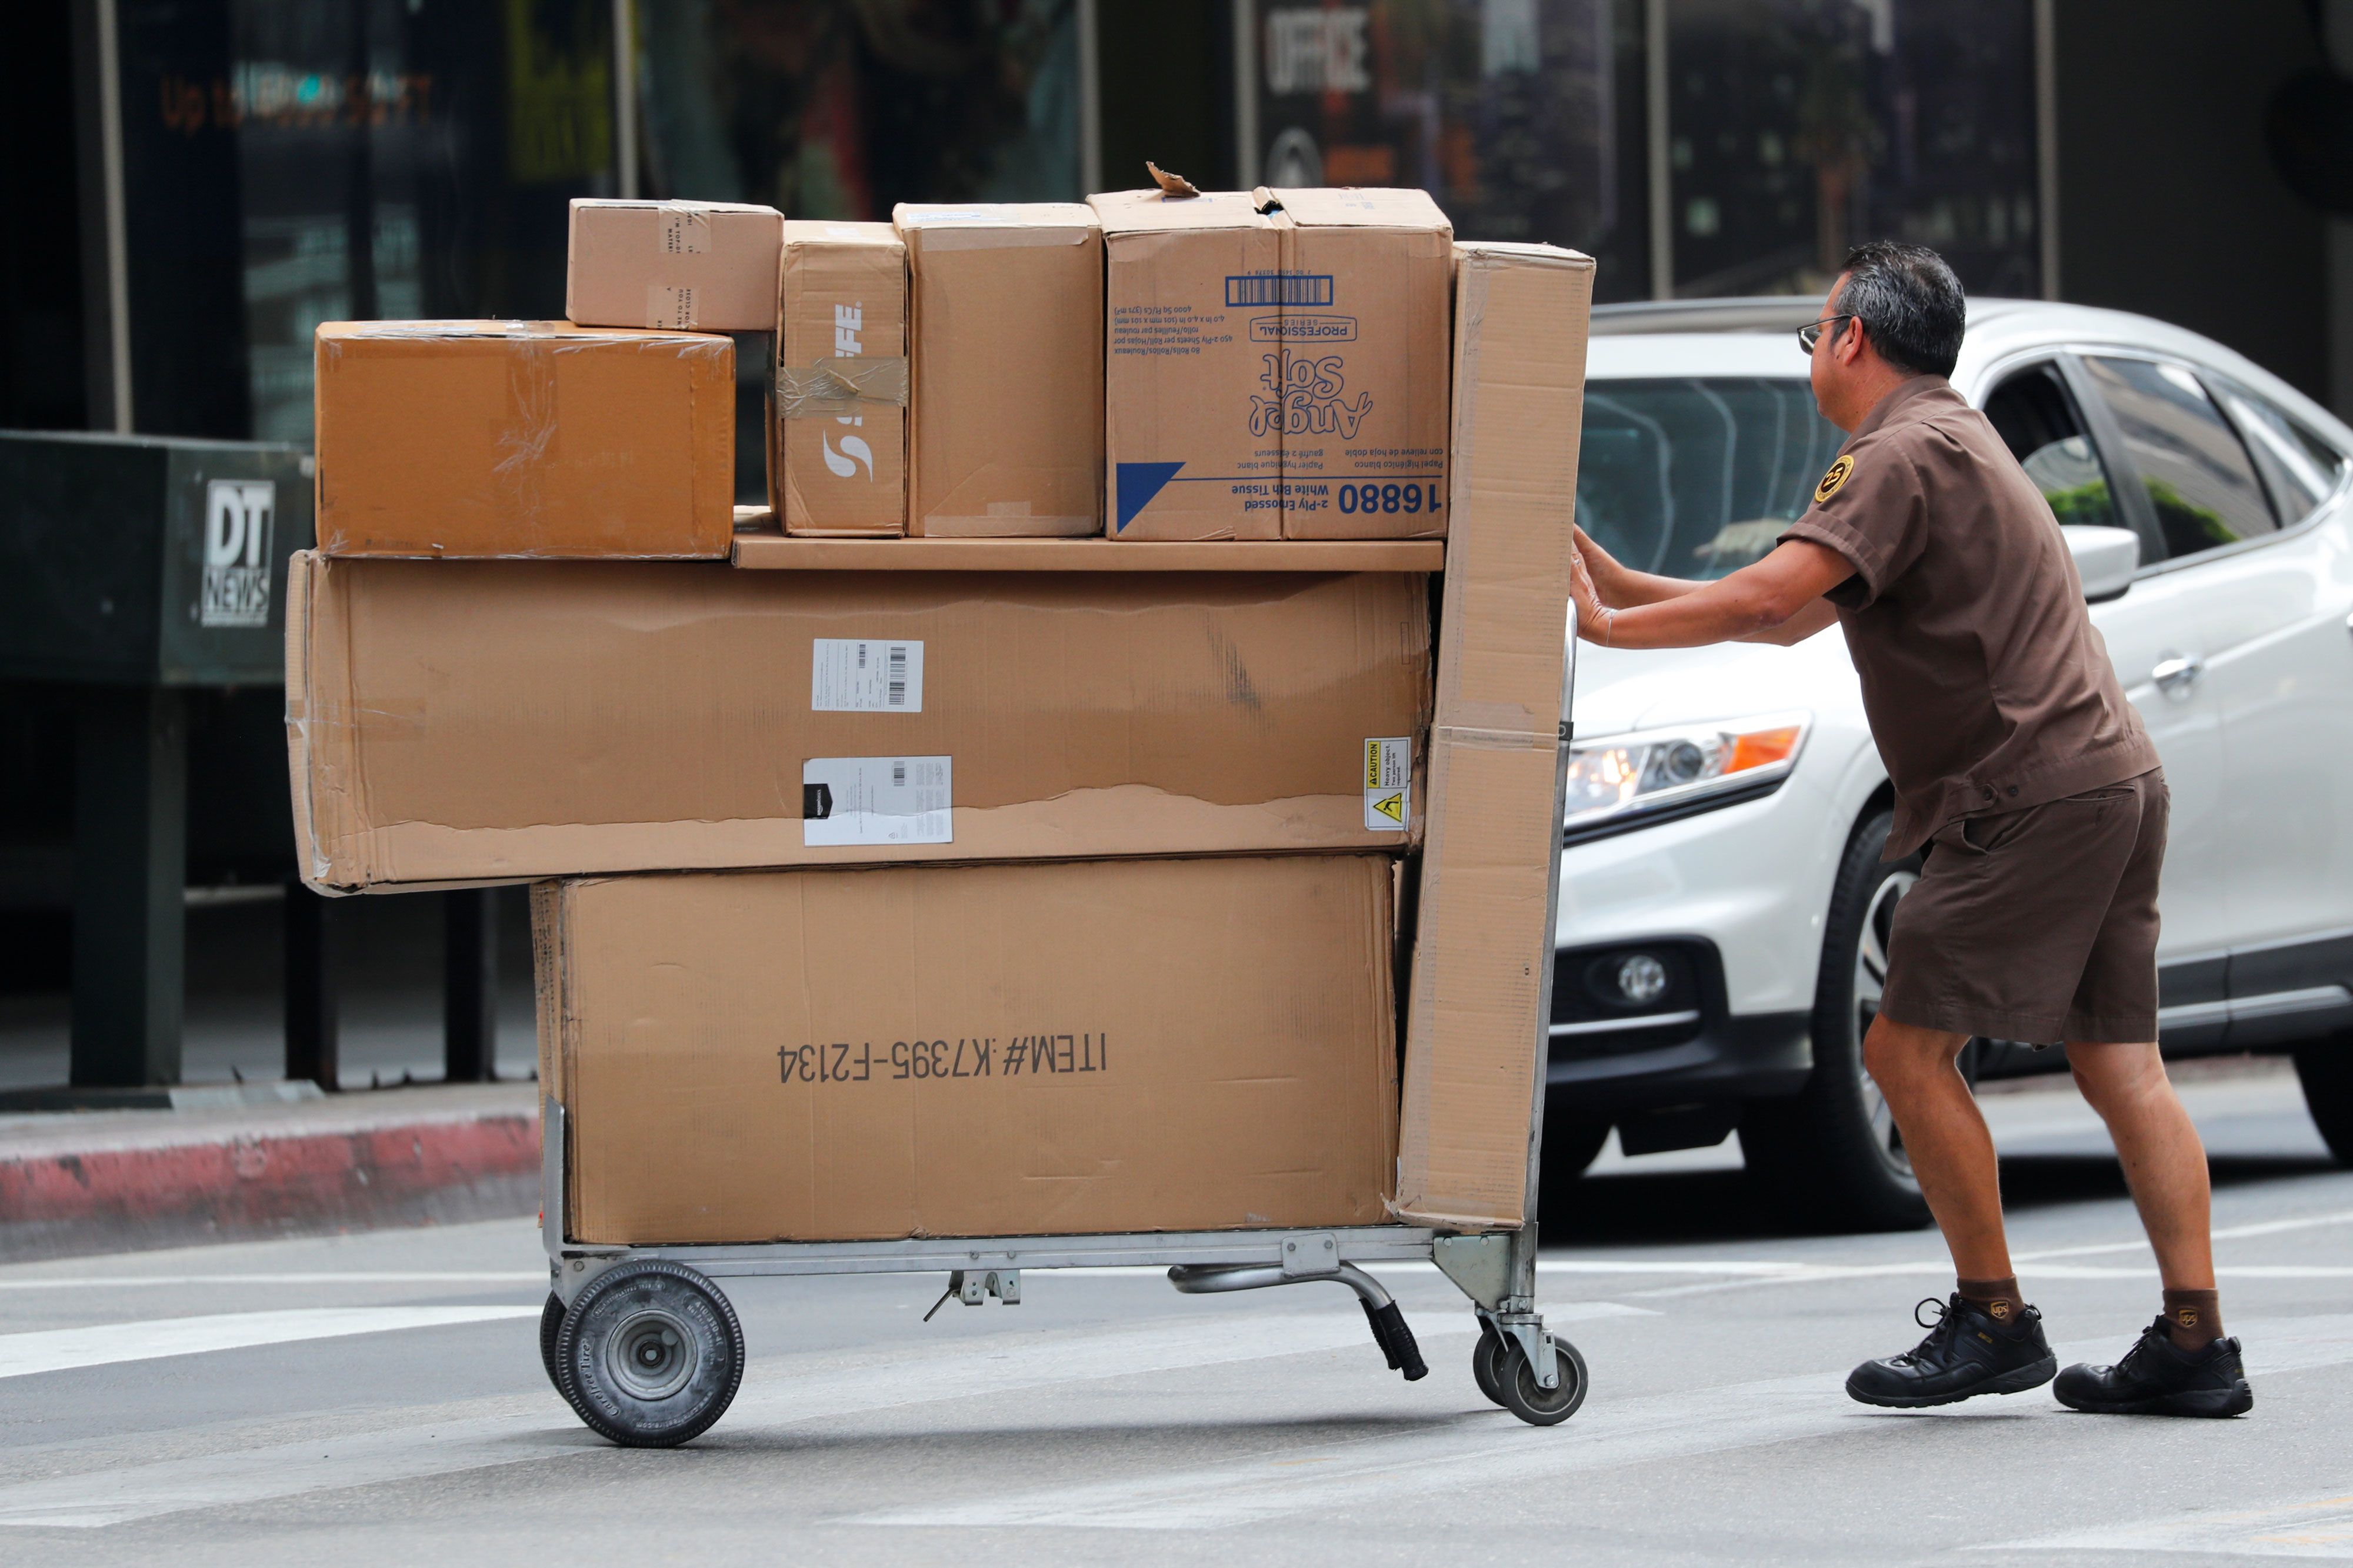 UPS expands delivery to 7 days, add locations and drone delivery